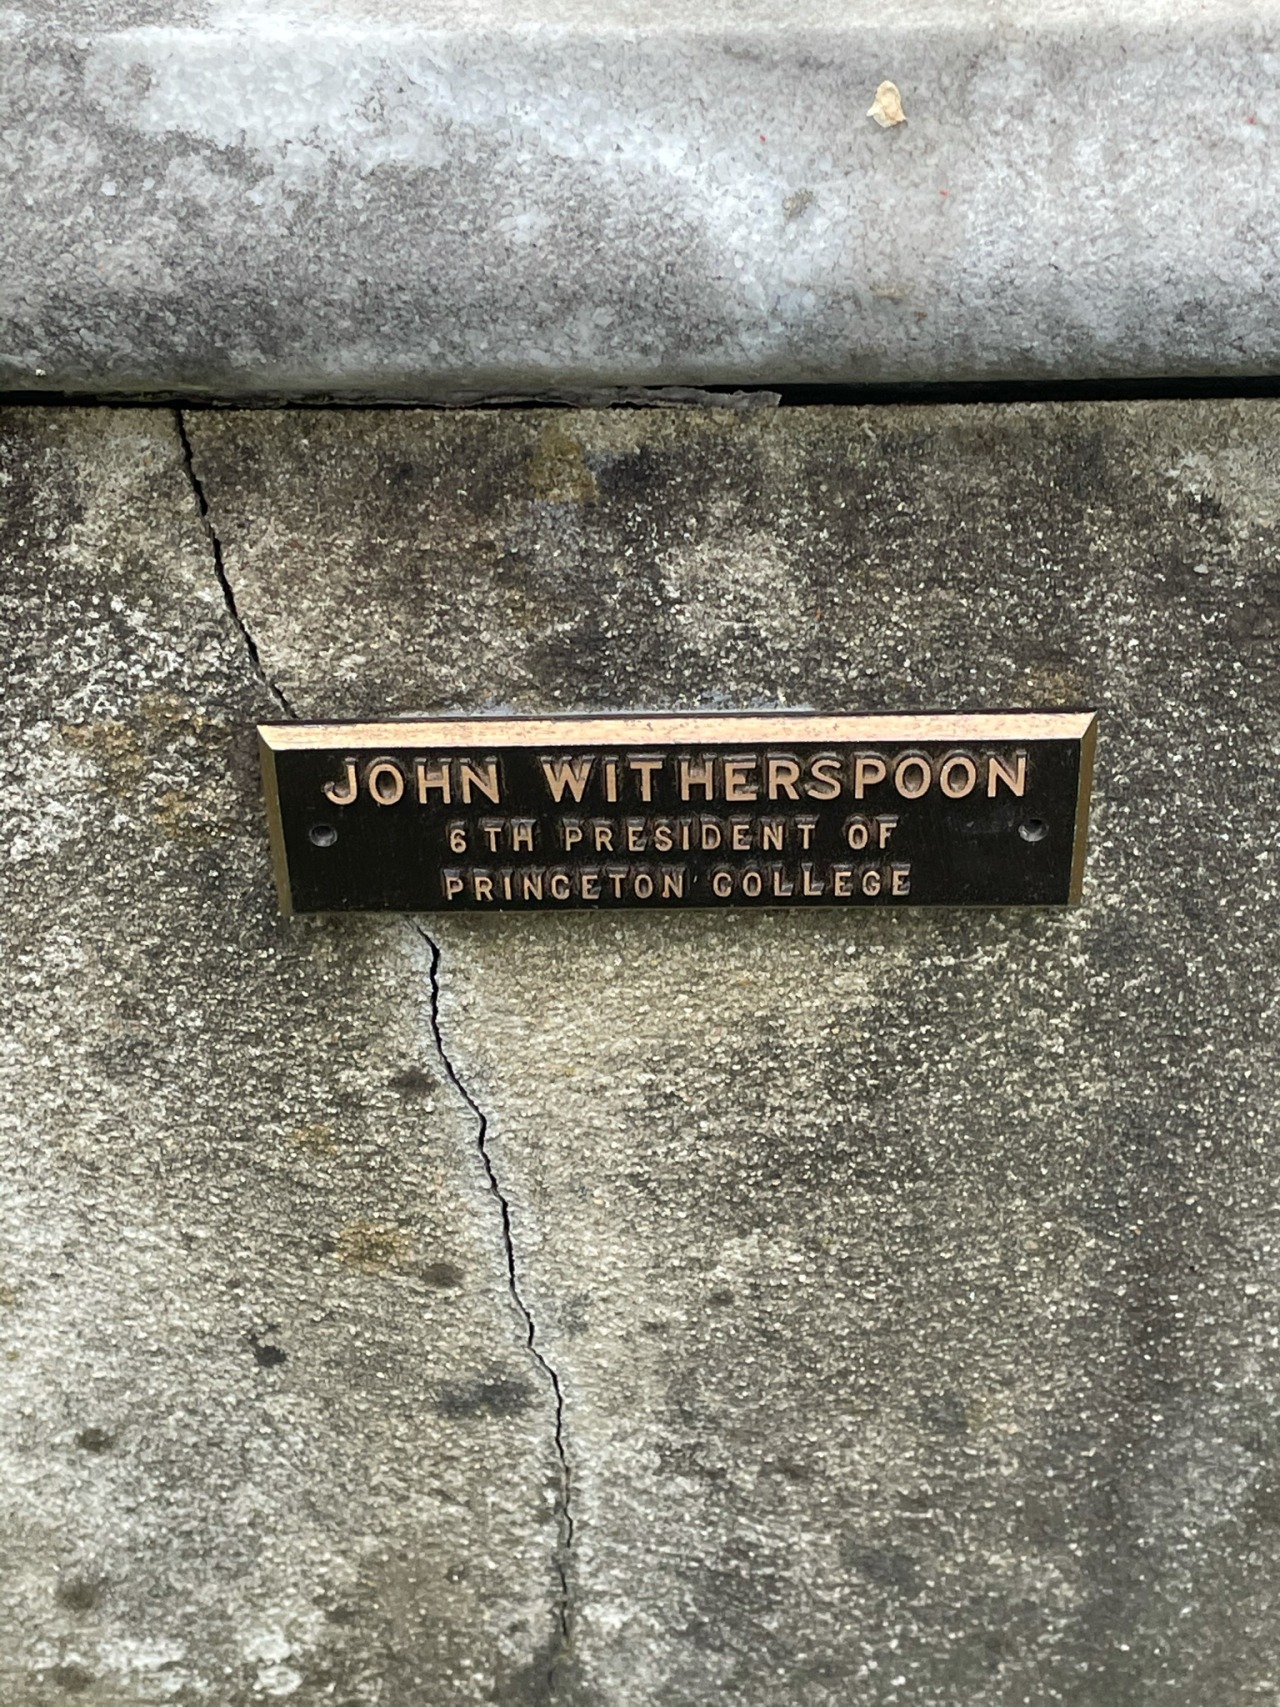 Princeton University Archives — A translation of Witherspoons epitaph is... pic